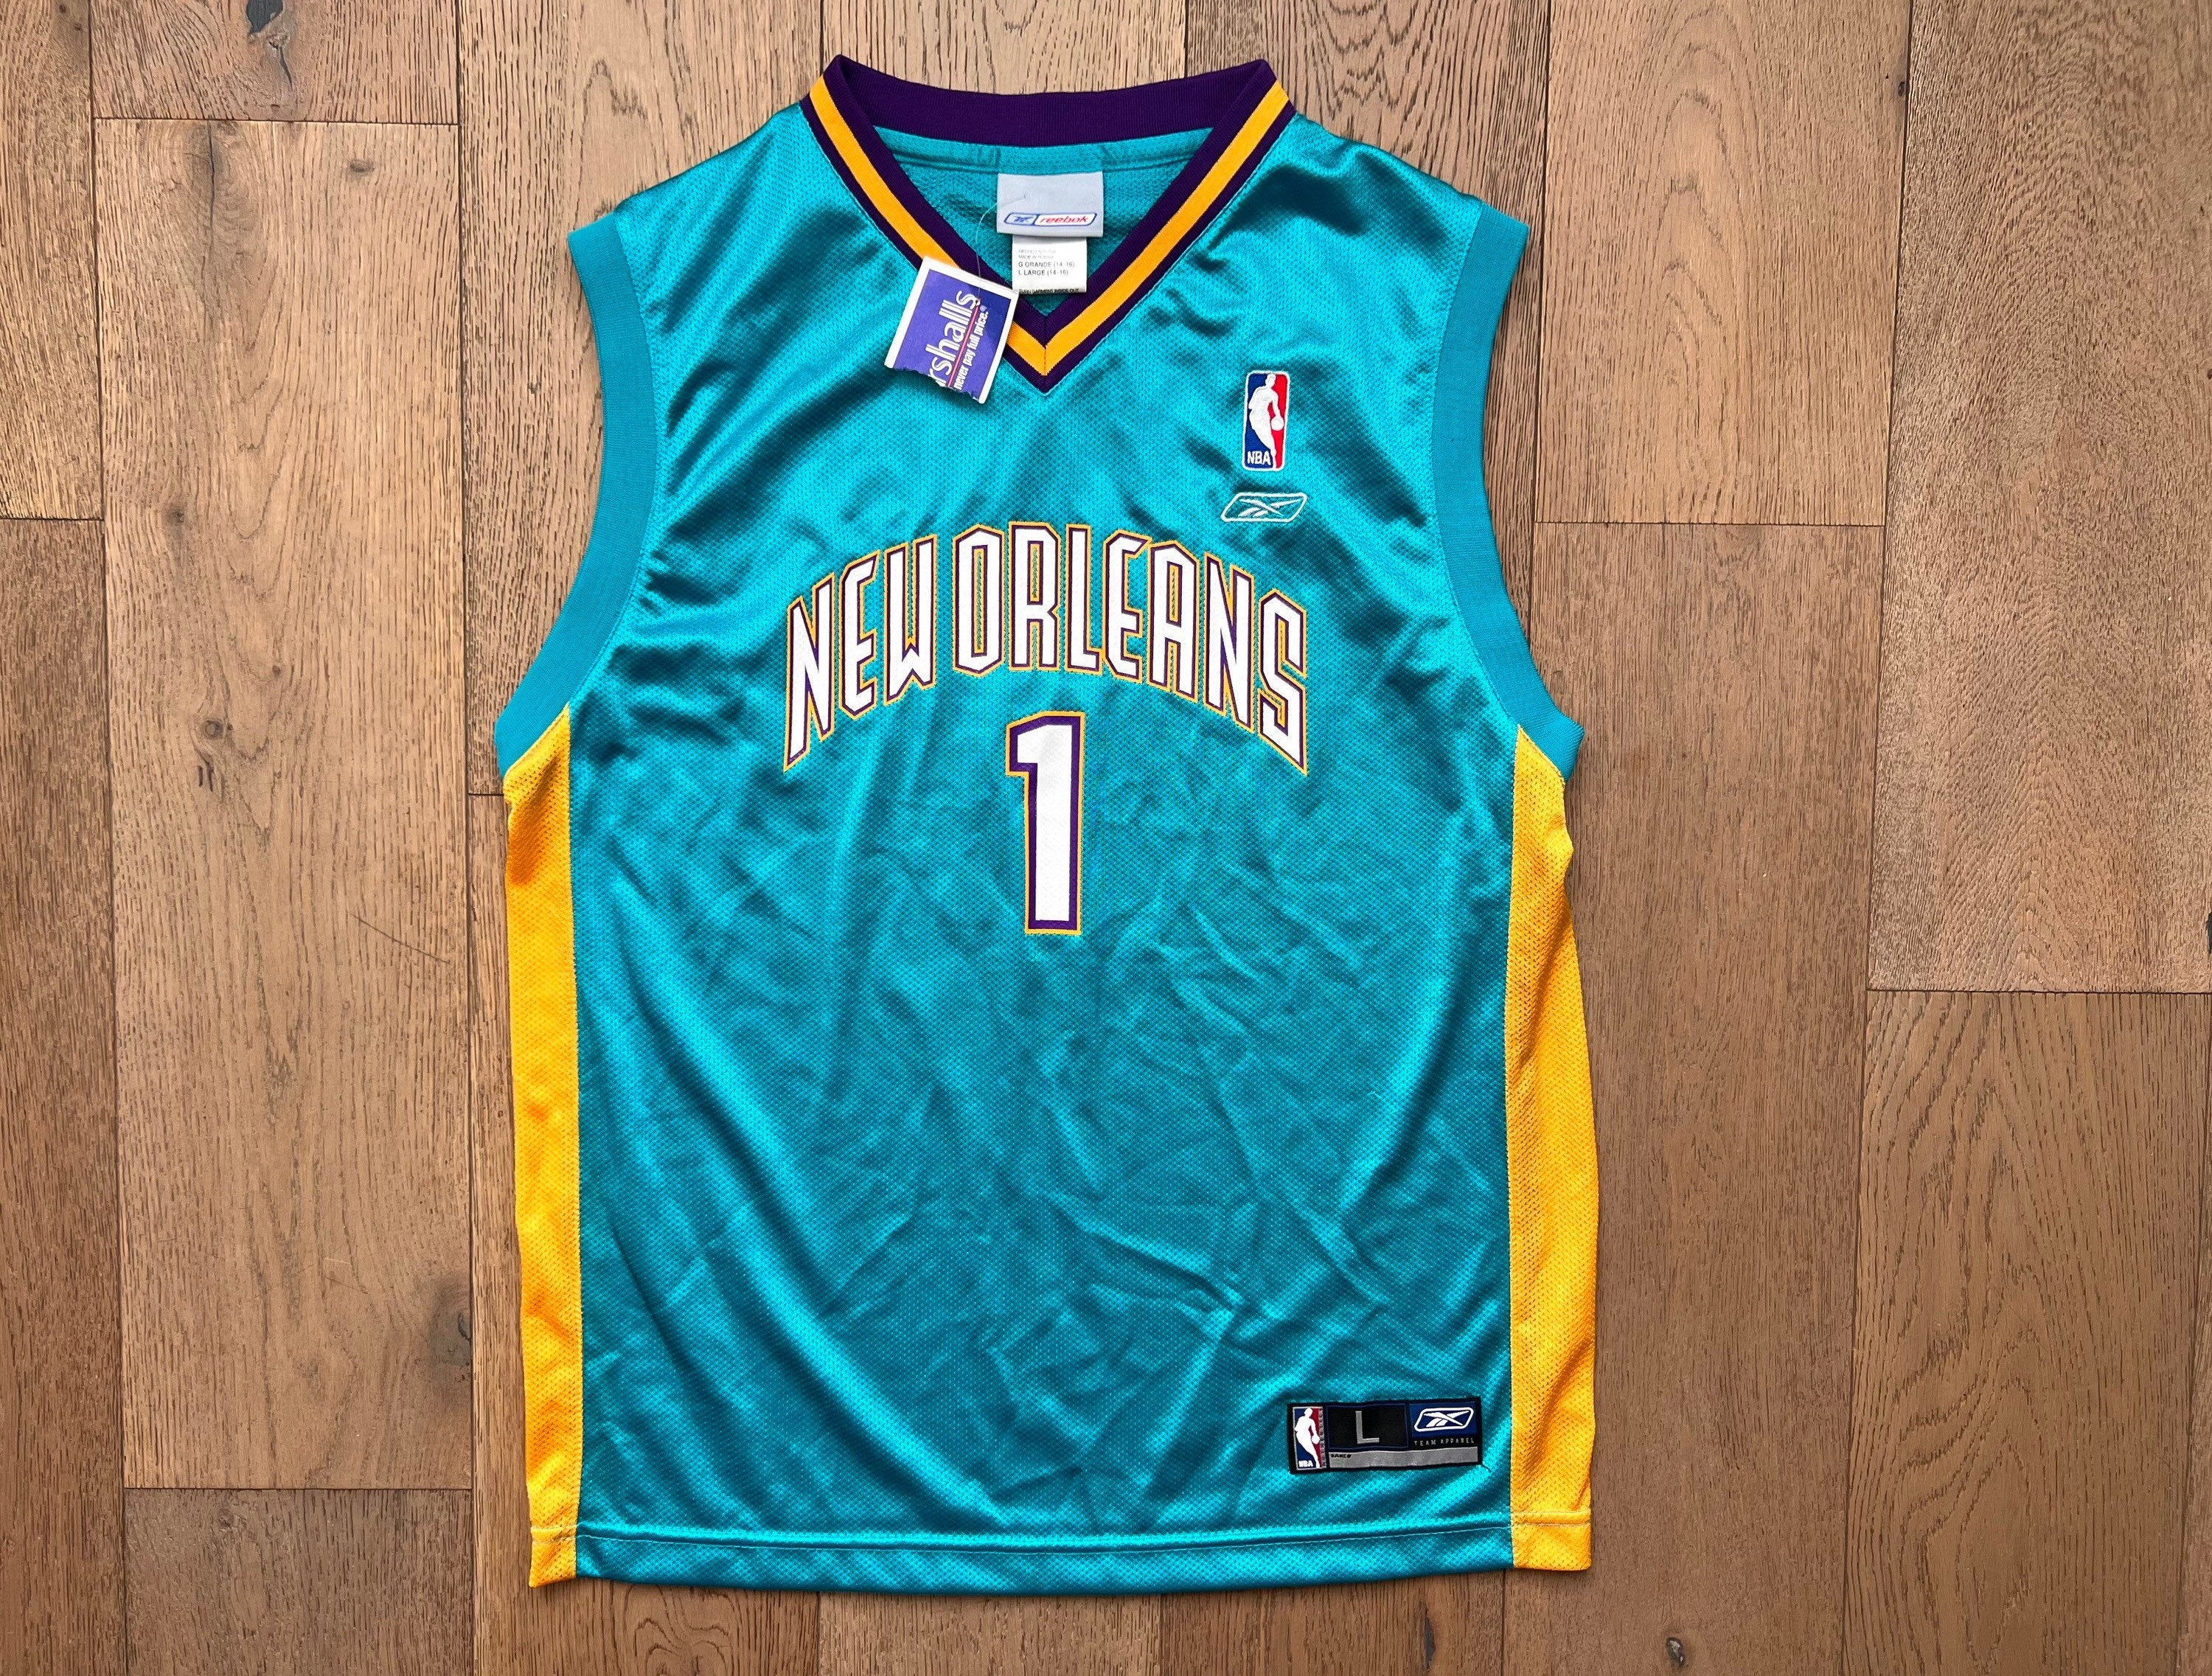 Size L New Orleans Hornets NBA Jerseys for sale